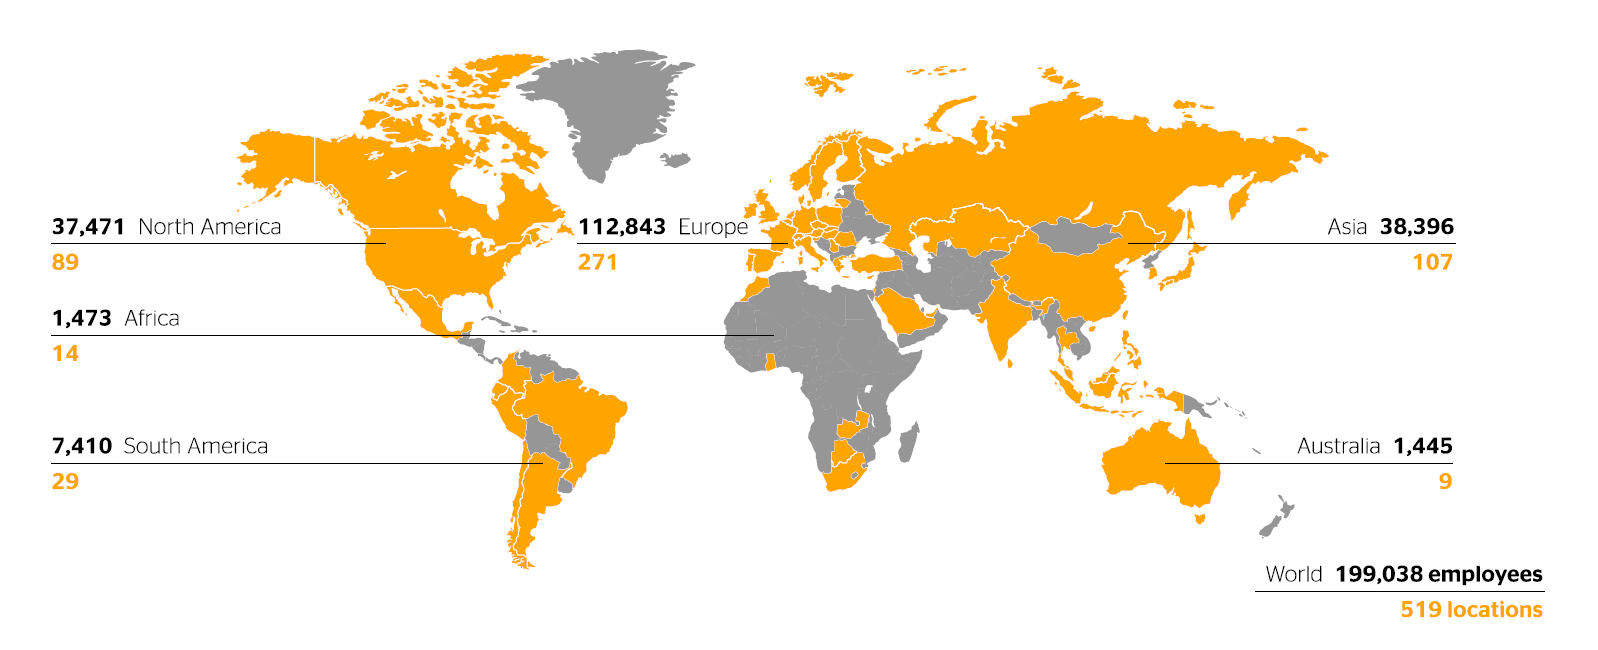 519 locations in 57 countries and markets